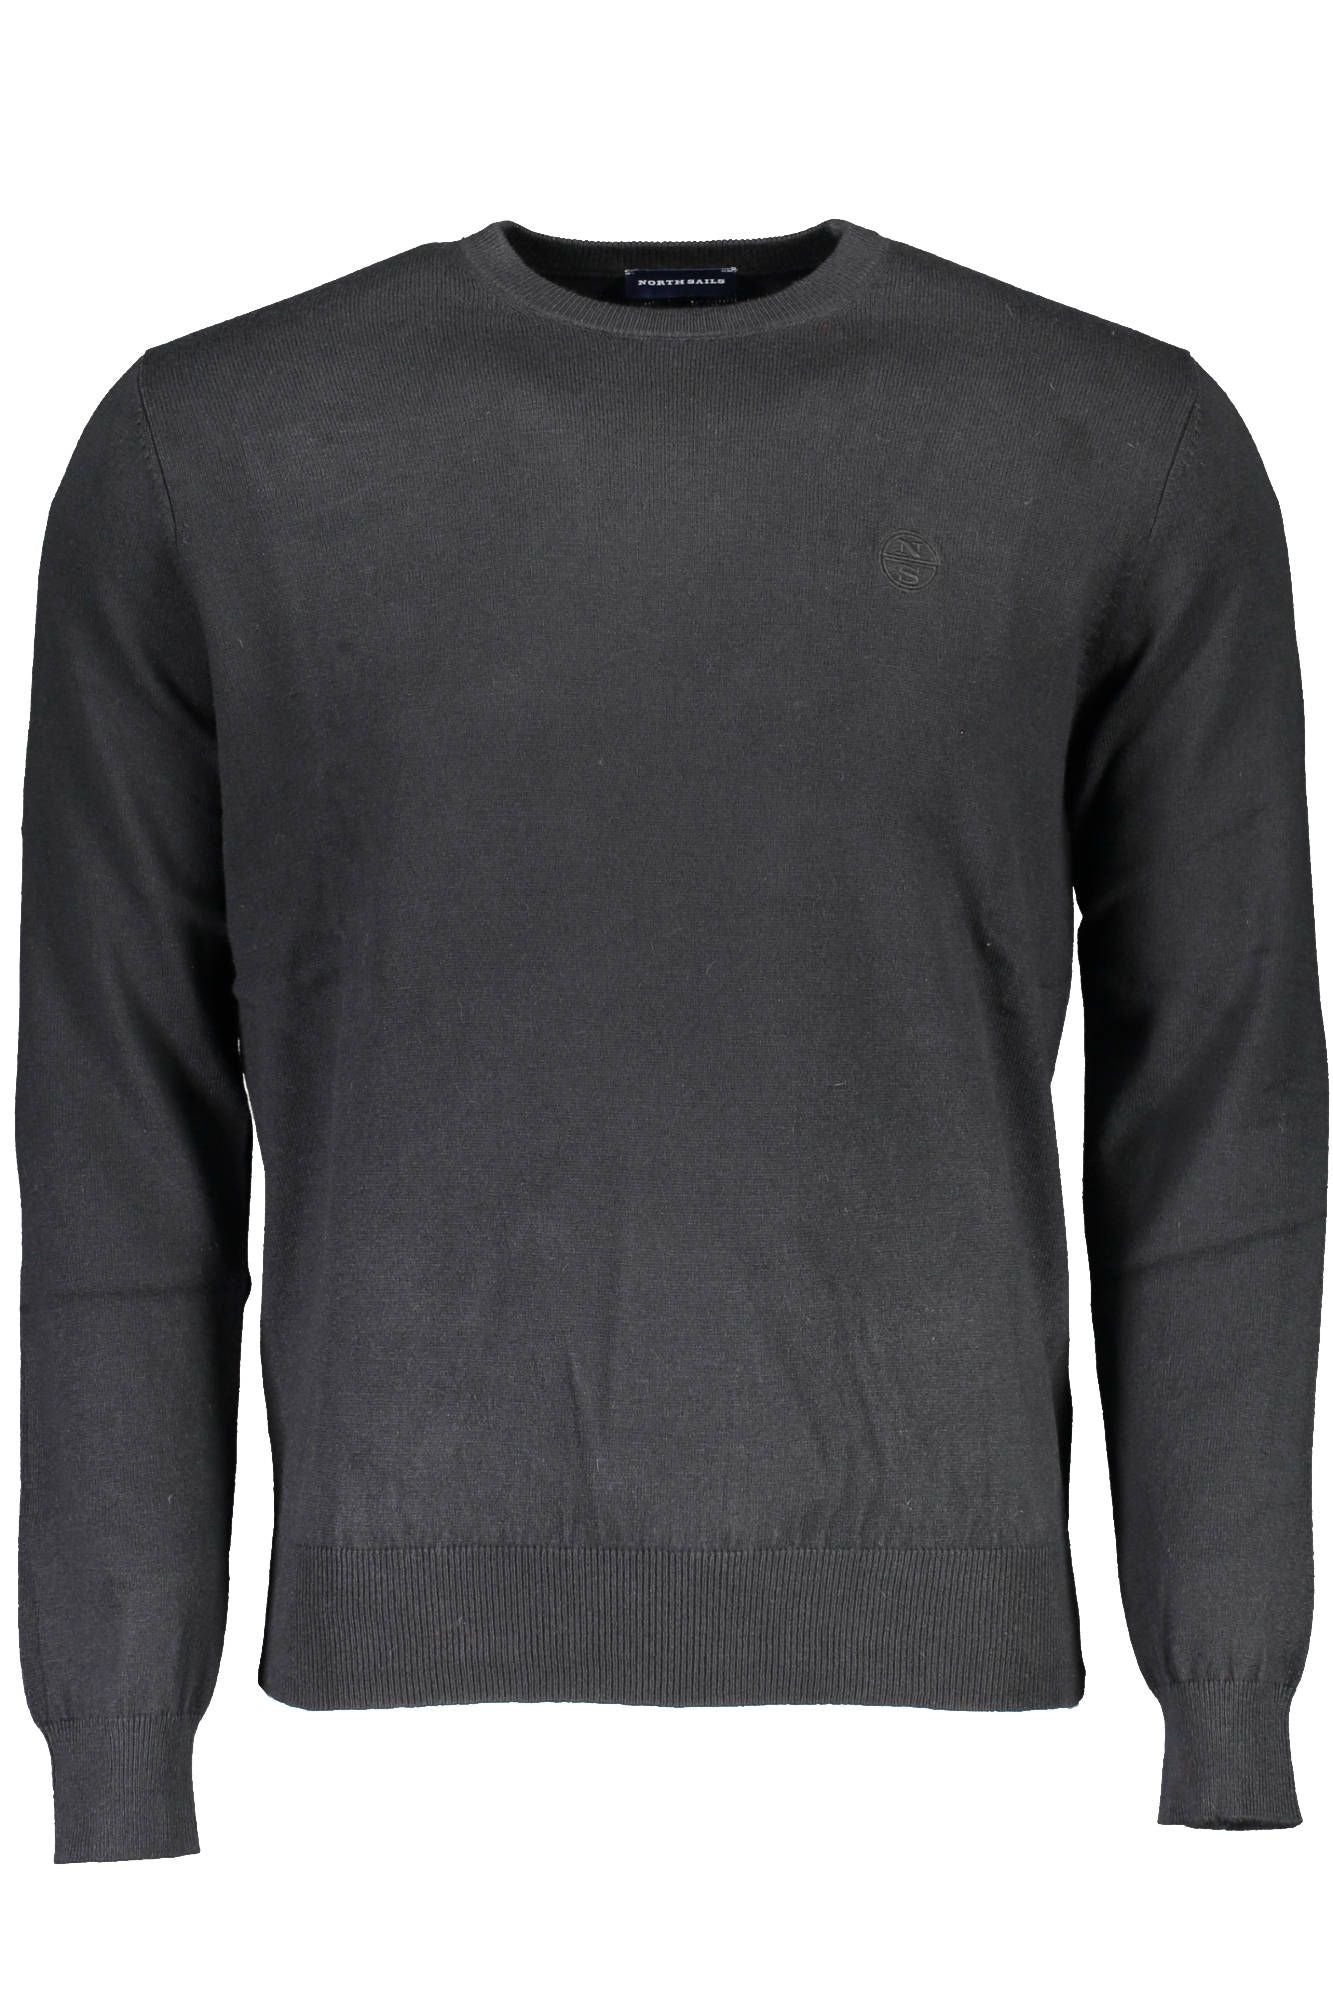 North Sails Eco-Friendly Embroidered Black Sweater